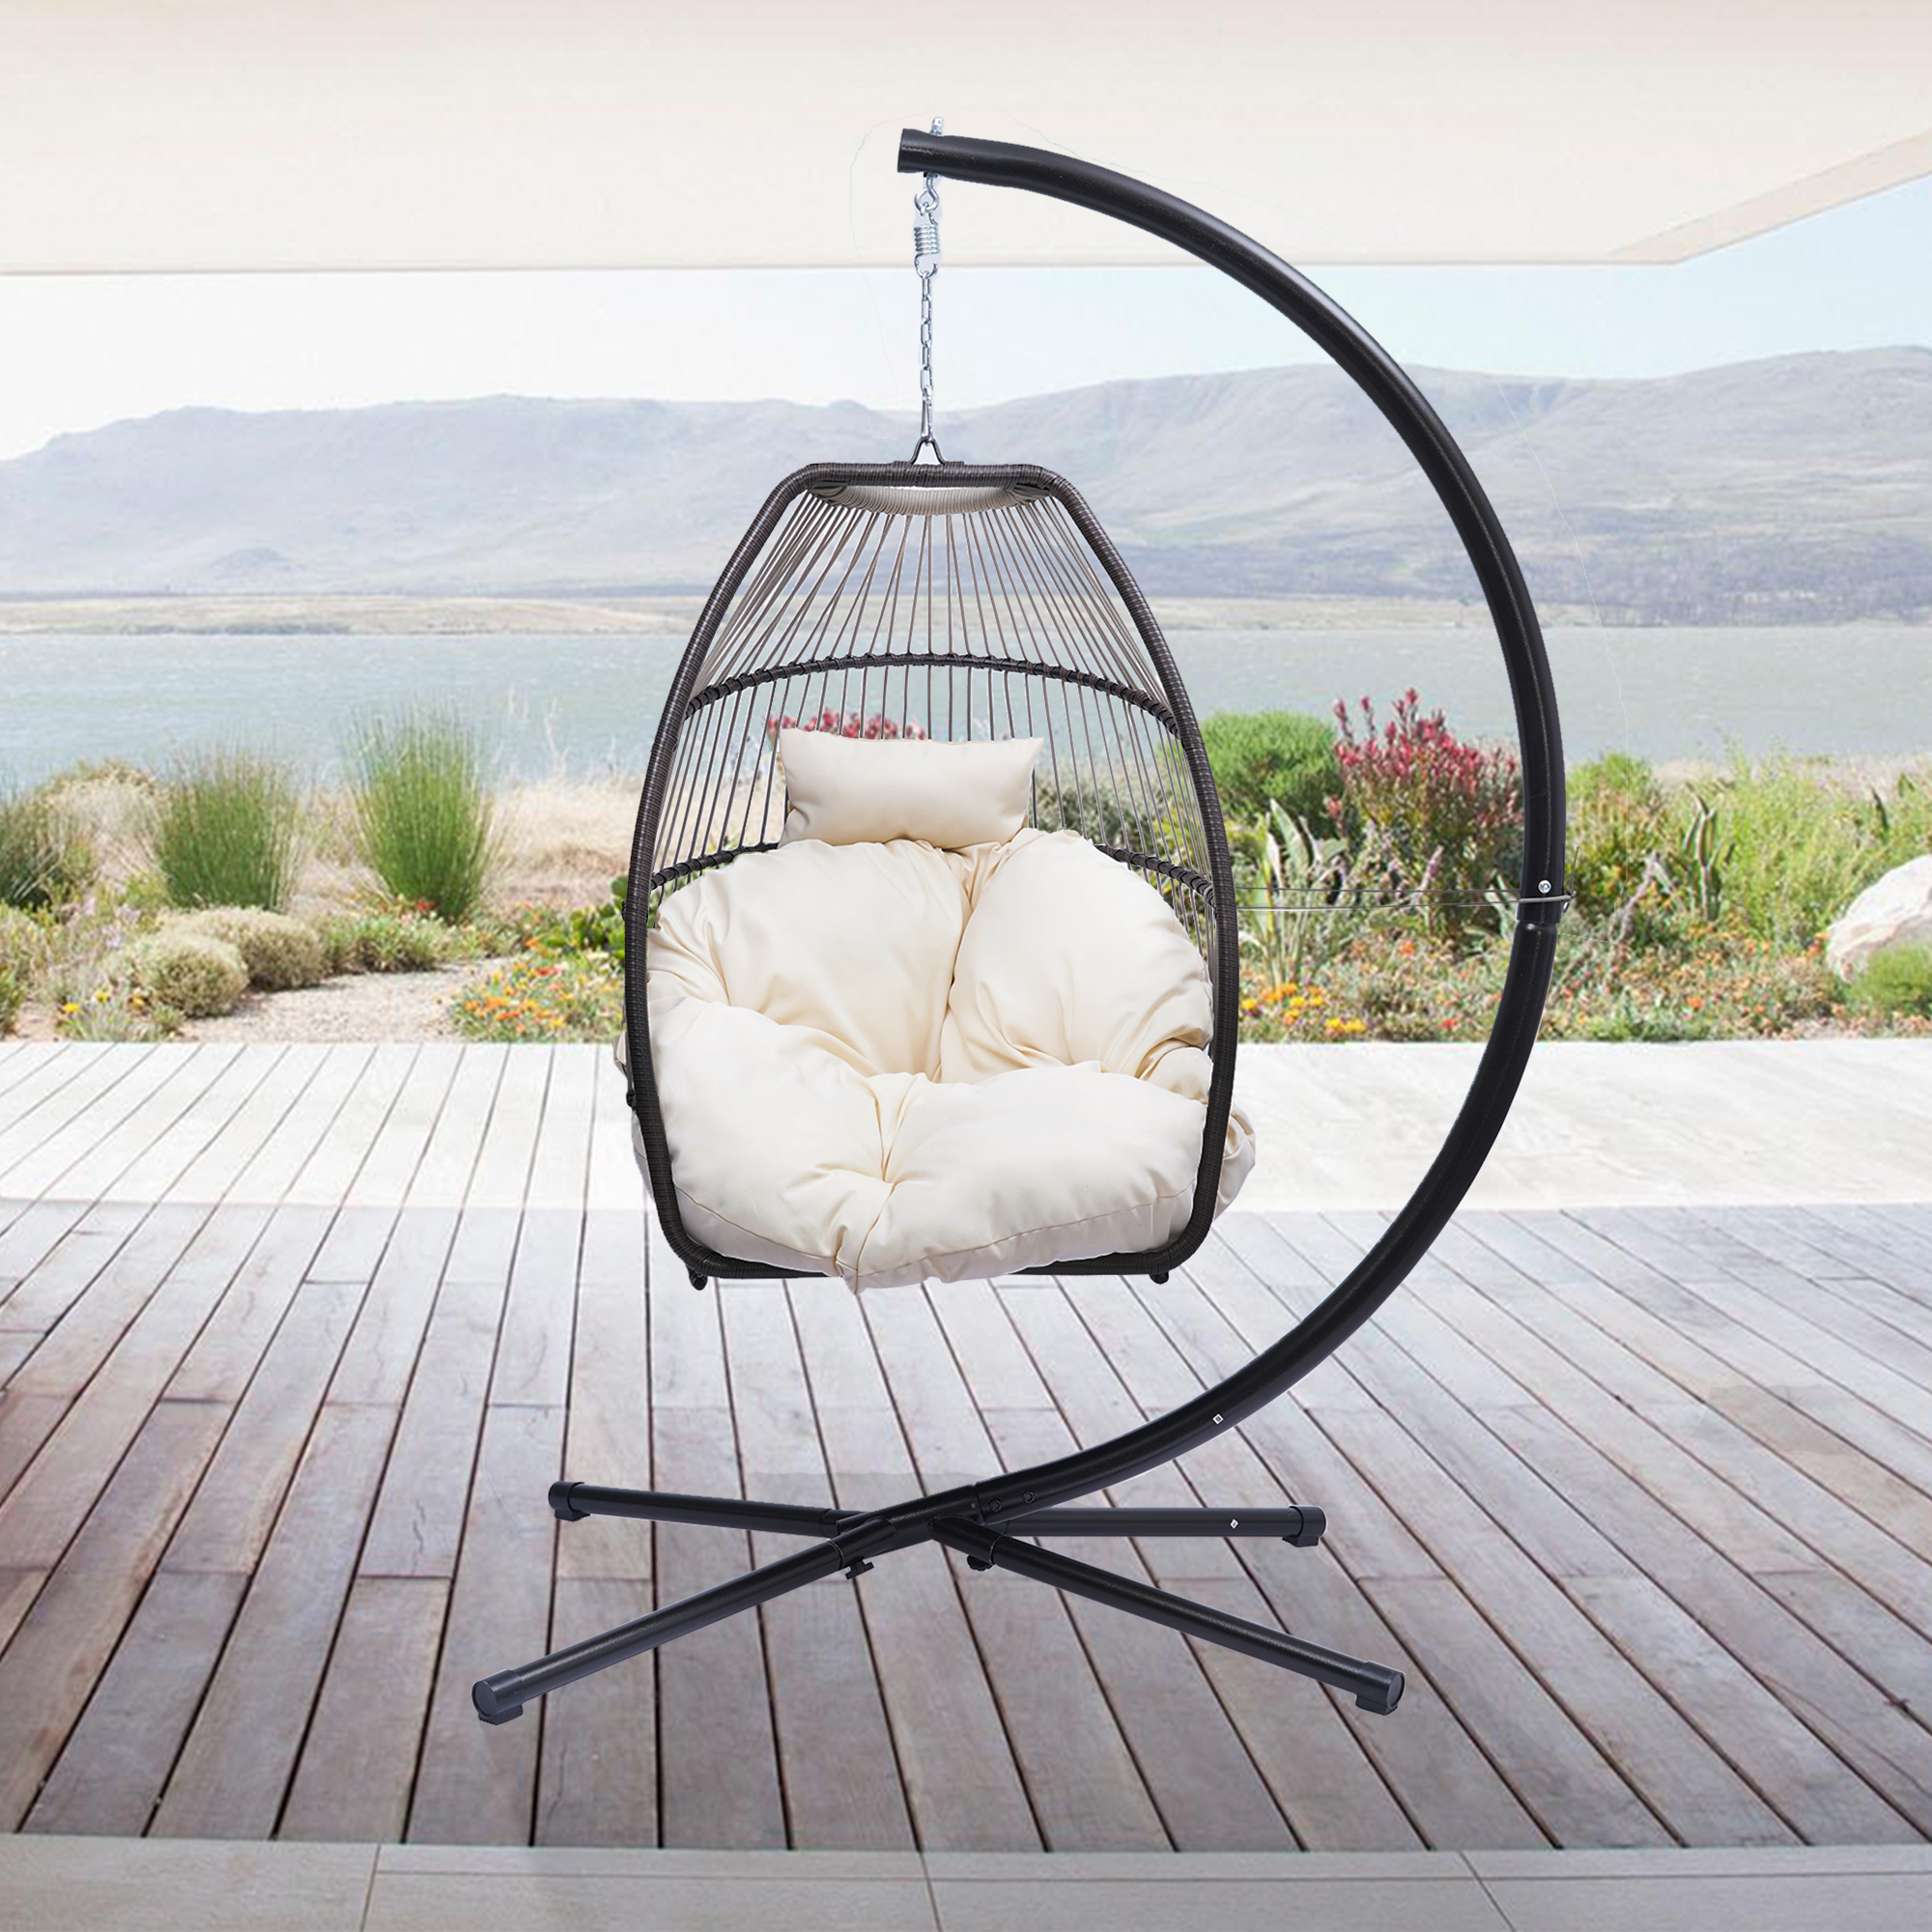 Outdoor Yard Folding Hanging Chair Egg Chair with Stand Indoor Outdoor Balcony Bedroom Basket Hanging Lounge Chair - image 1 of 9